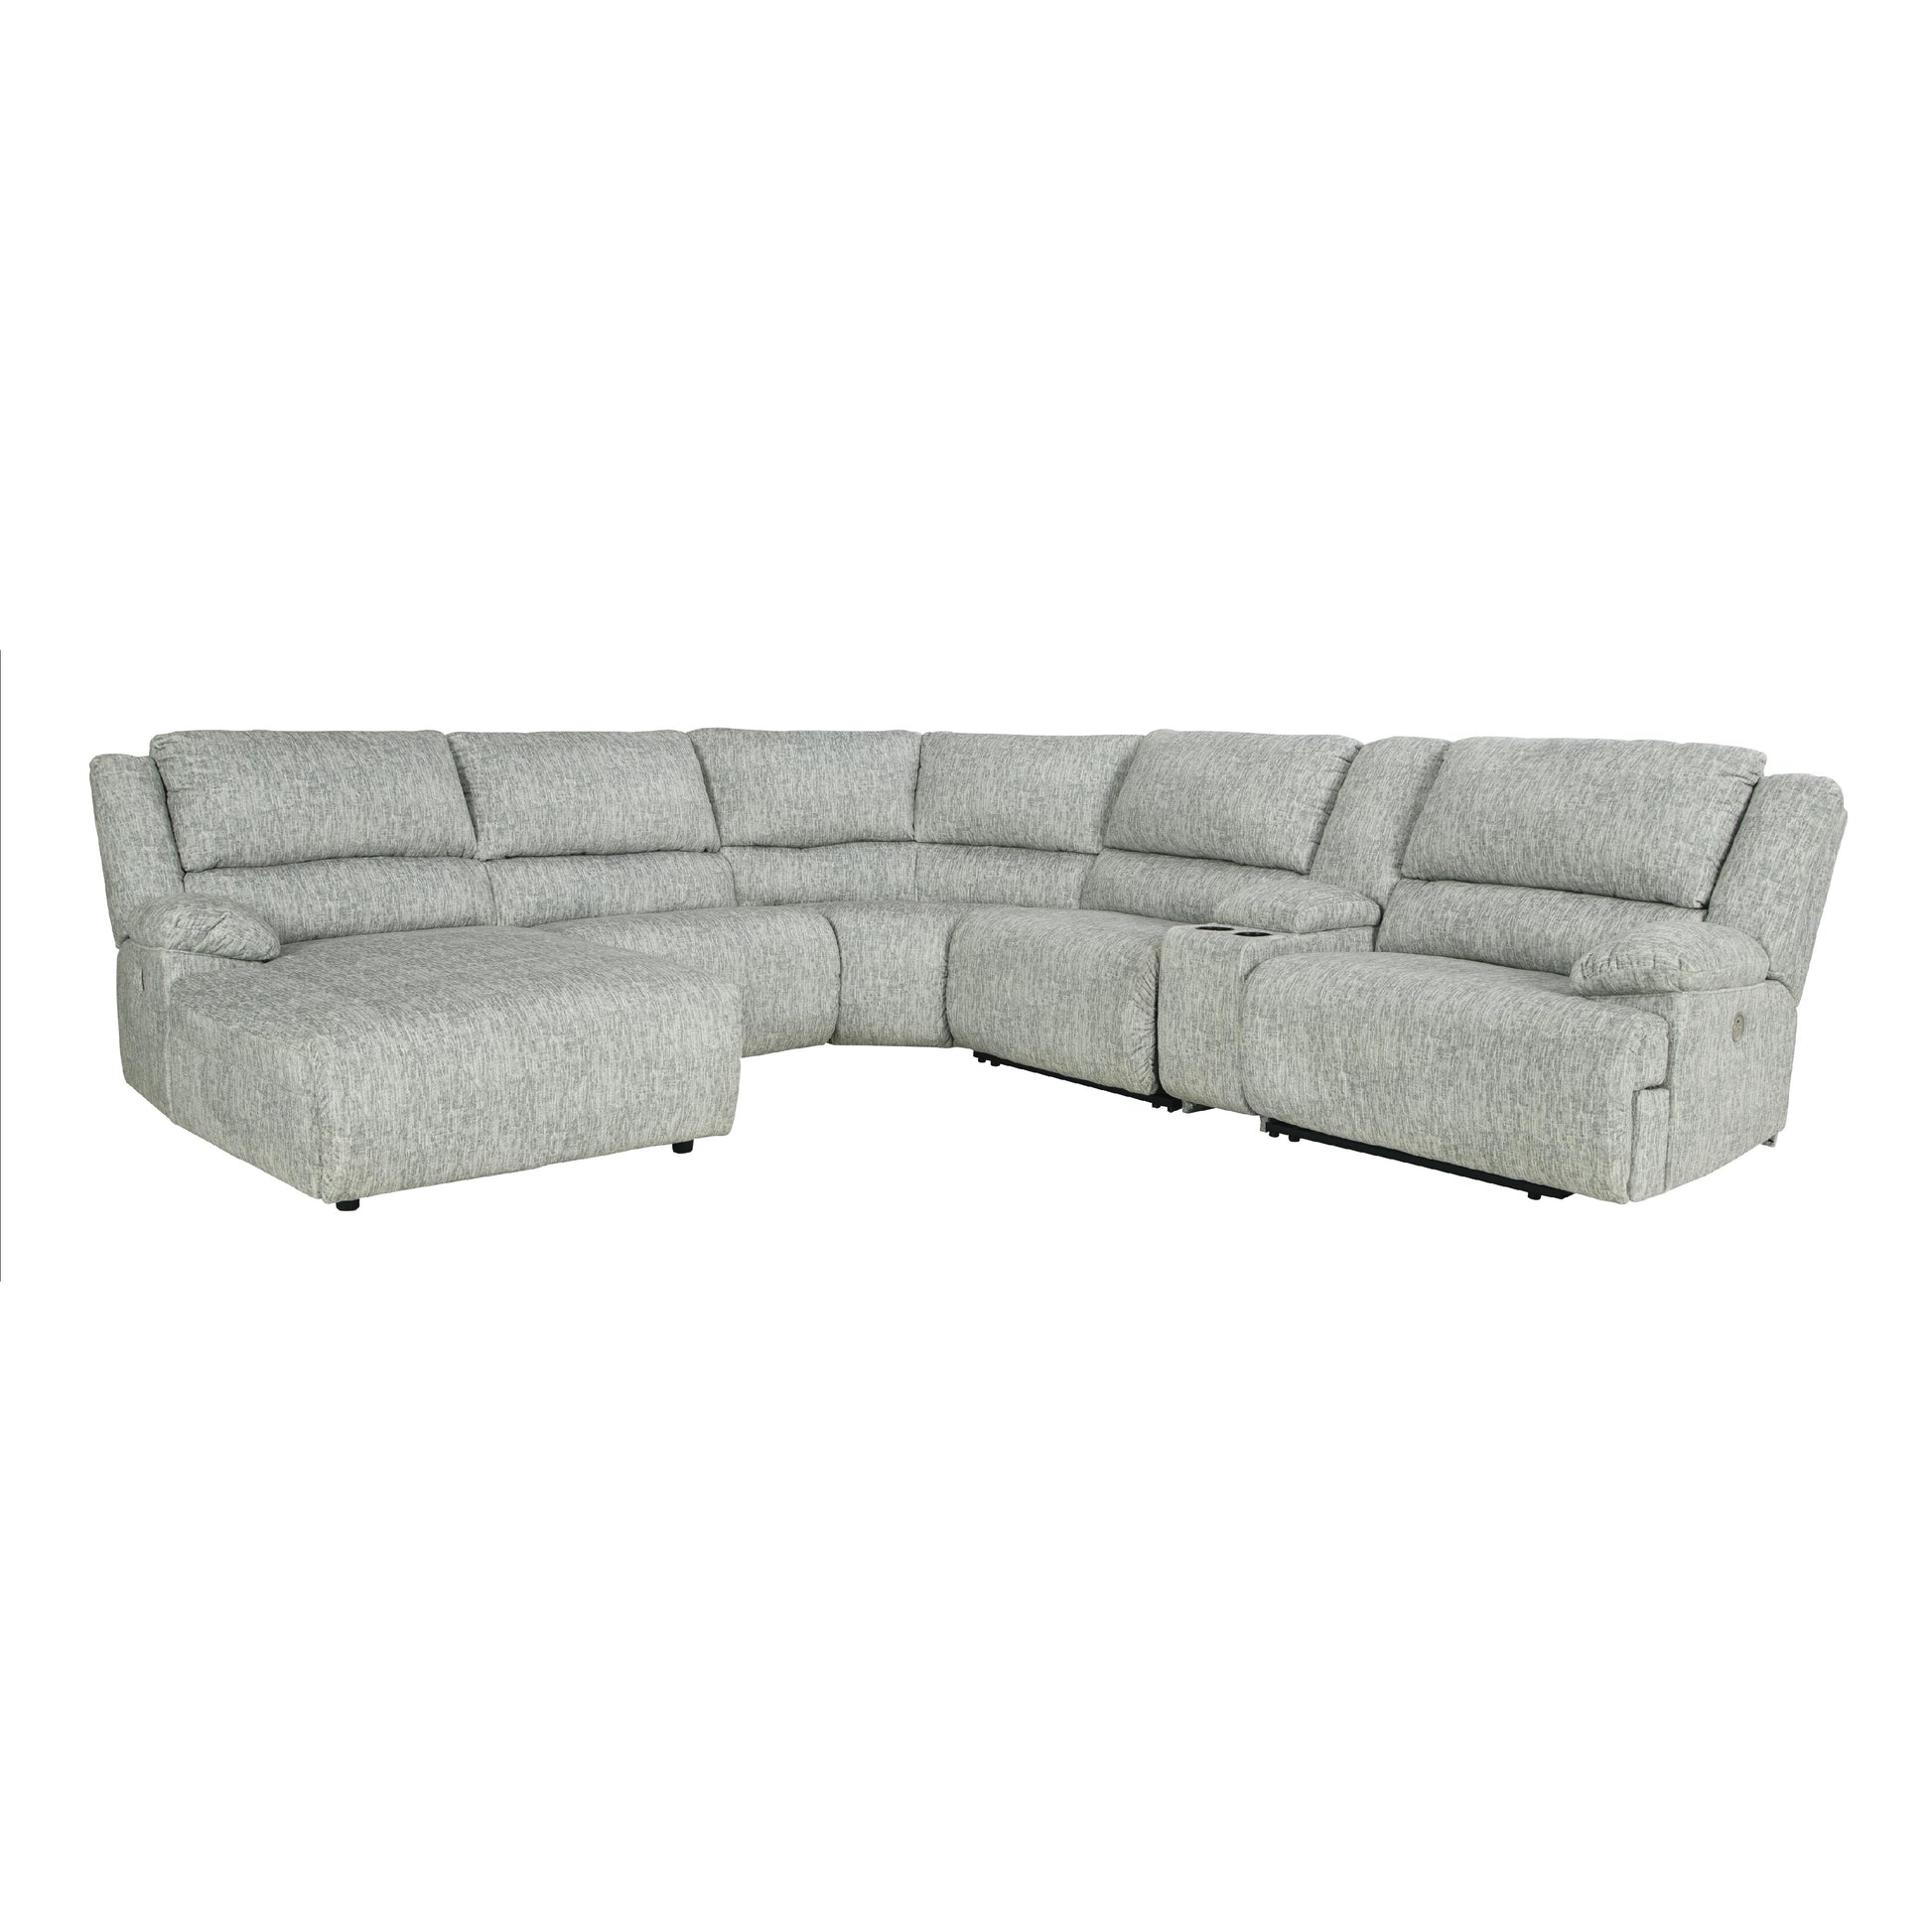 Signature Design by Ashley McClelland Power Reclining Fabric 6 pc Sectional 2930279/2930246/2930277/2930219/2930257/2930262 IMAGE 1